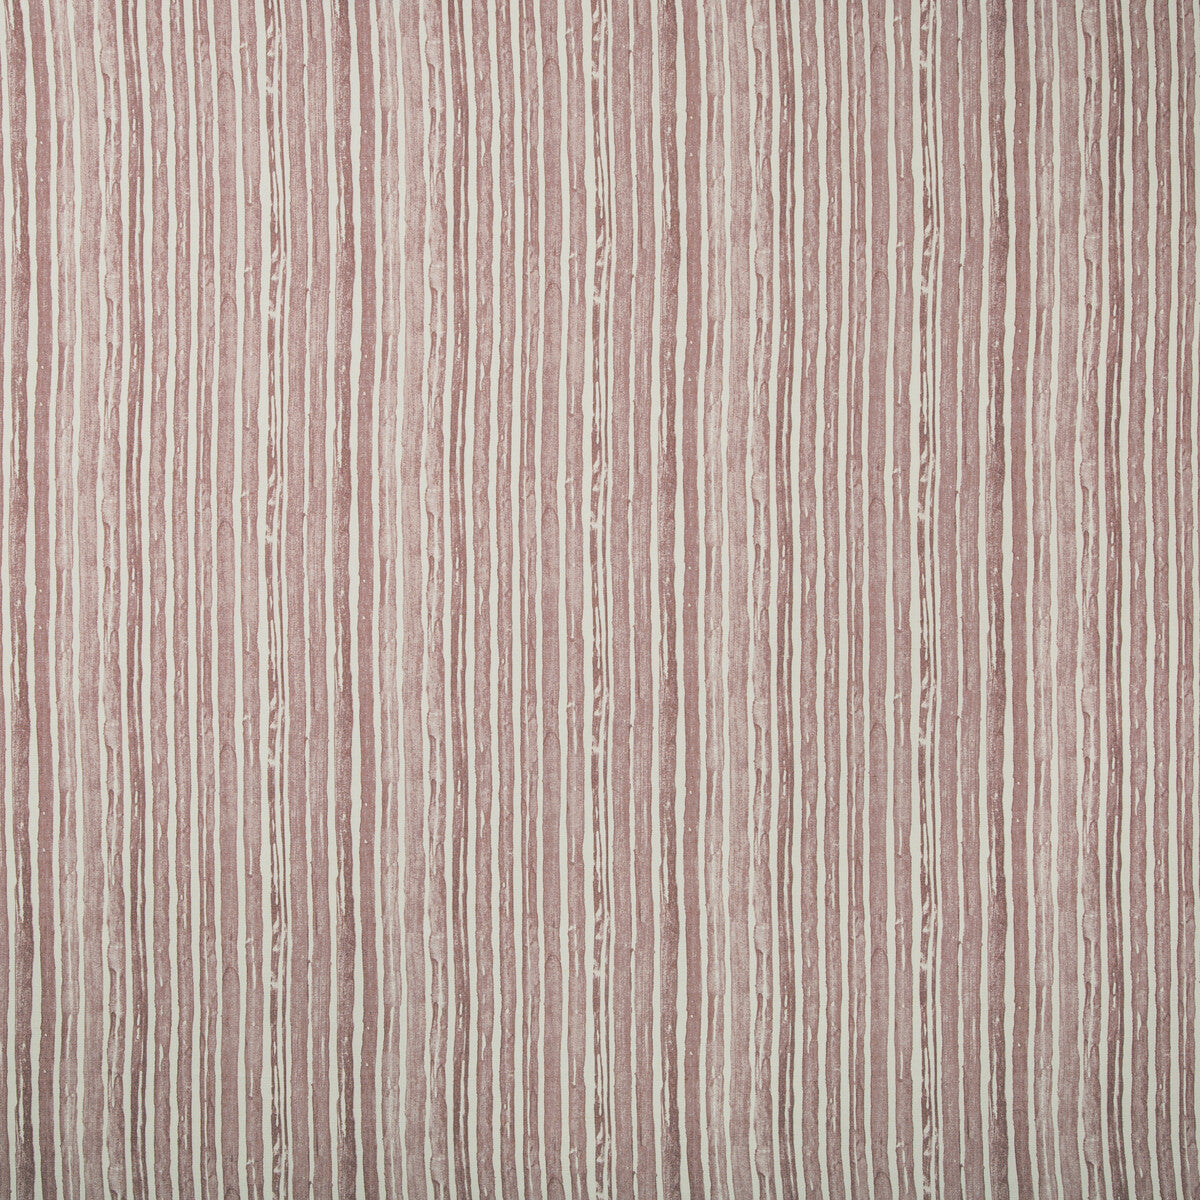 Benson Stripe fabric in lavender color - pattern 2019151.710.0 - by Lee Jofa in the Carrier And Company collection